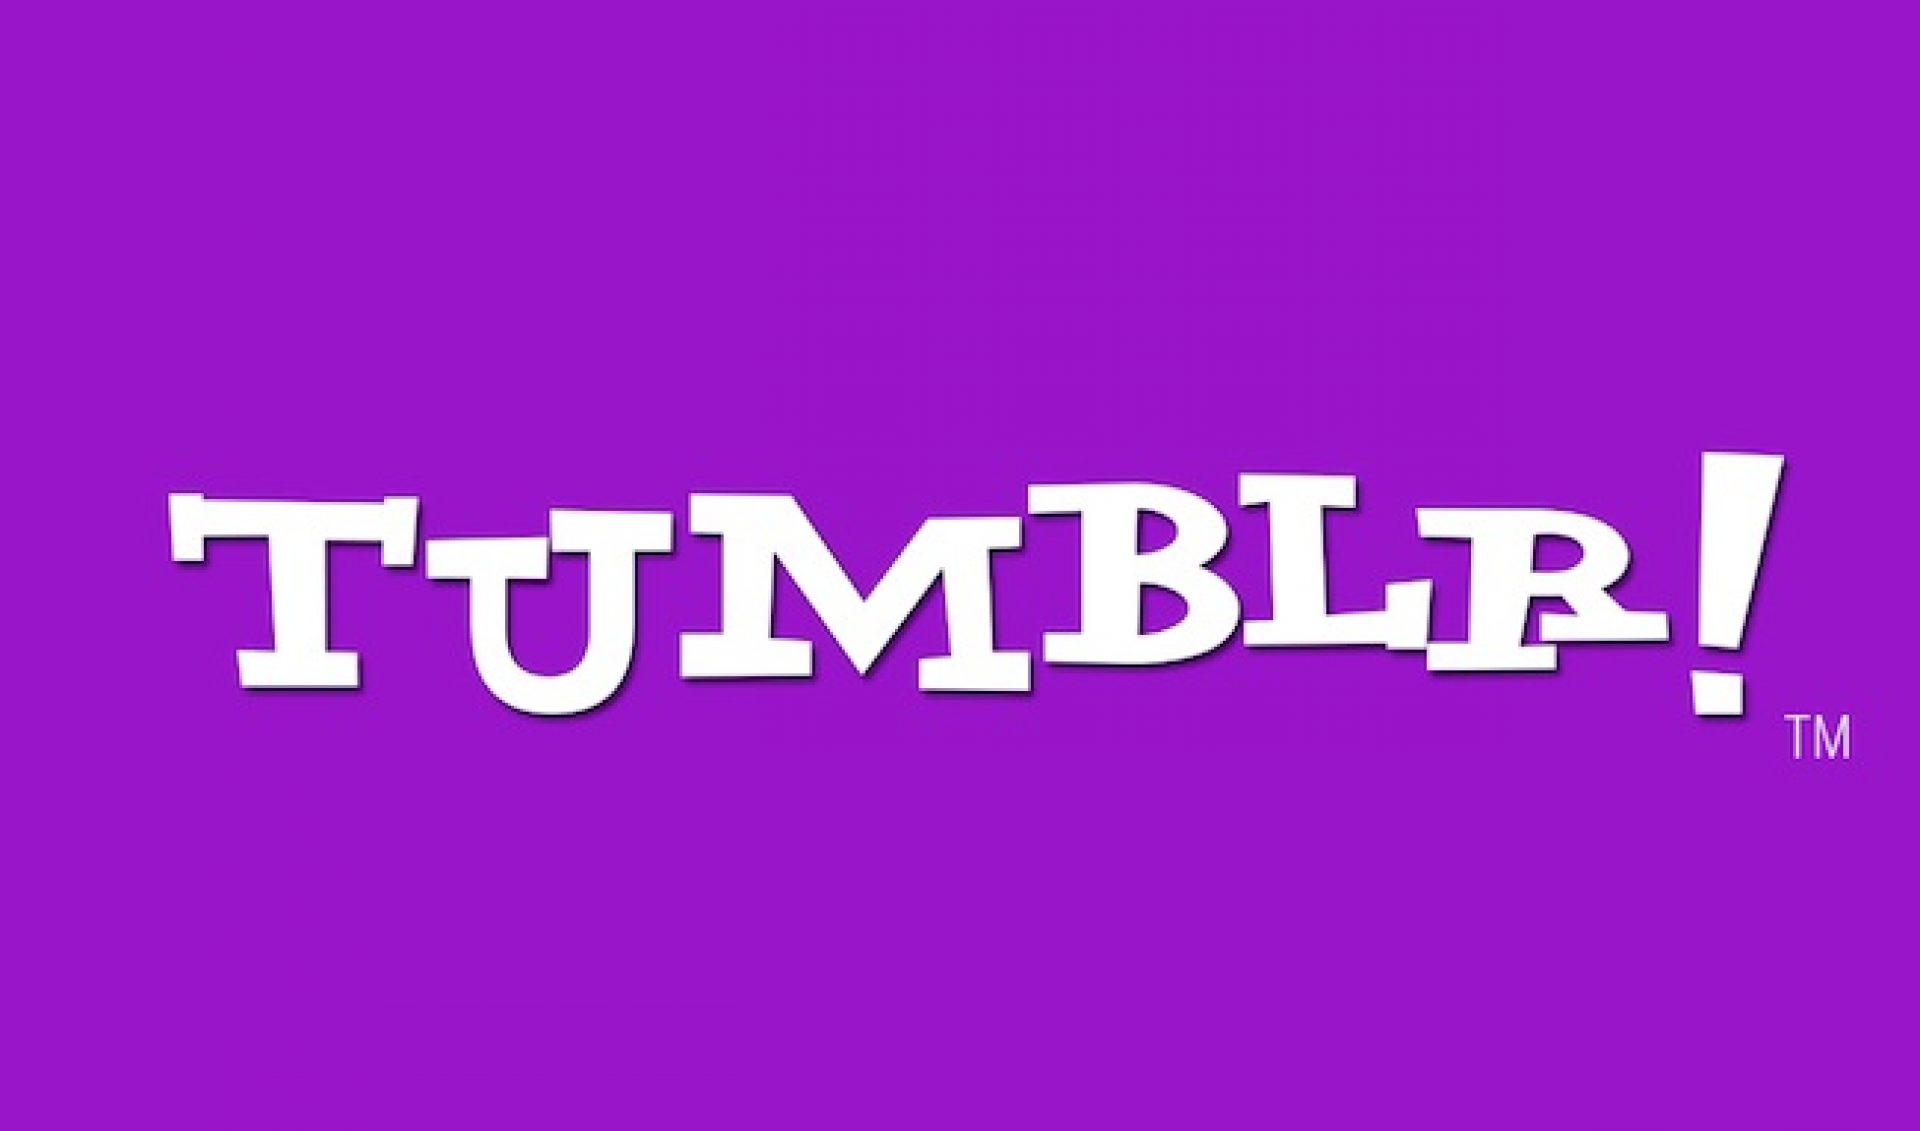 Is Tumblr Yahoo’s YouTube Competitor?